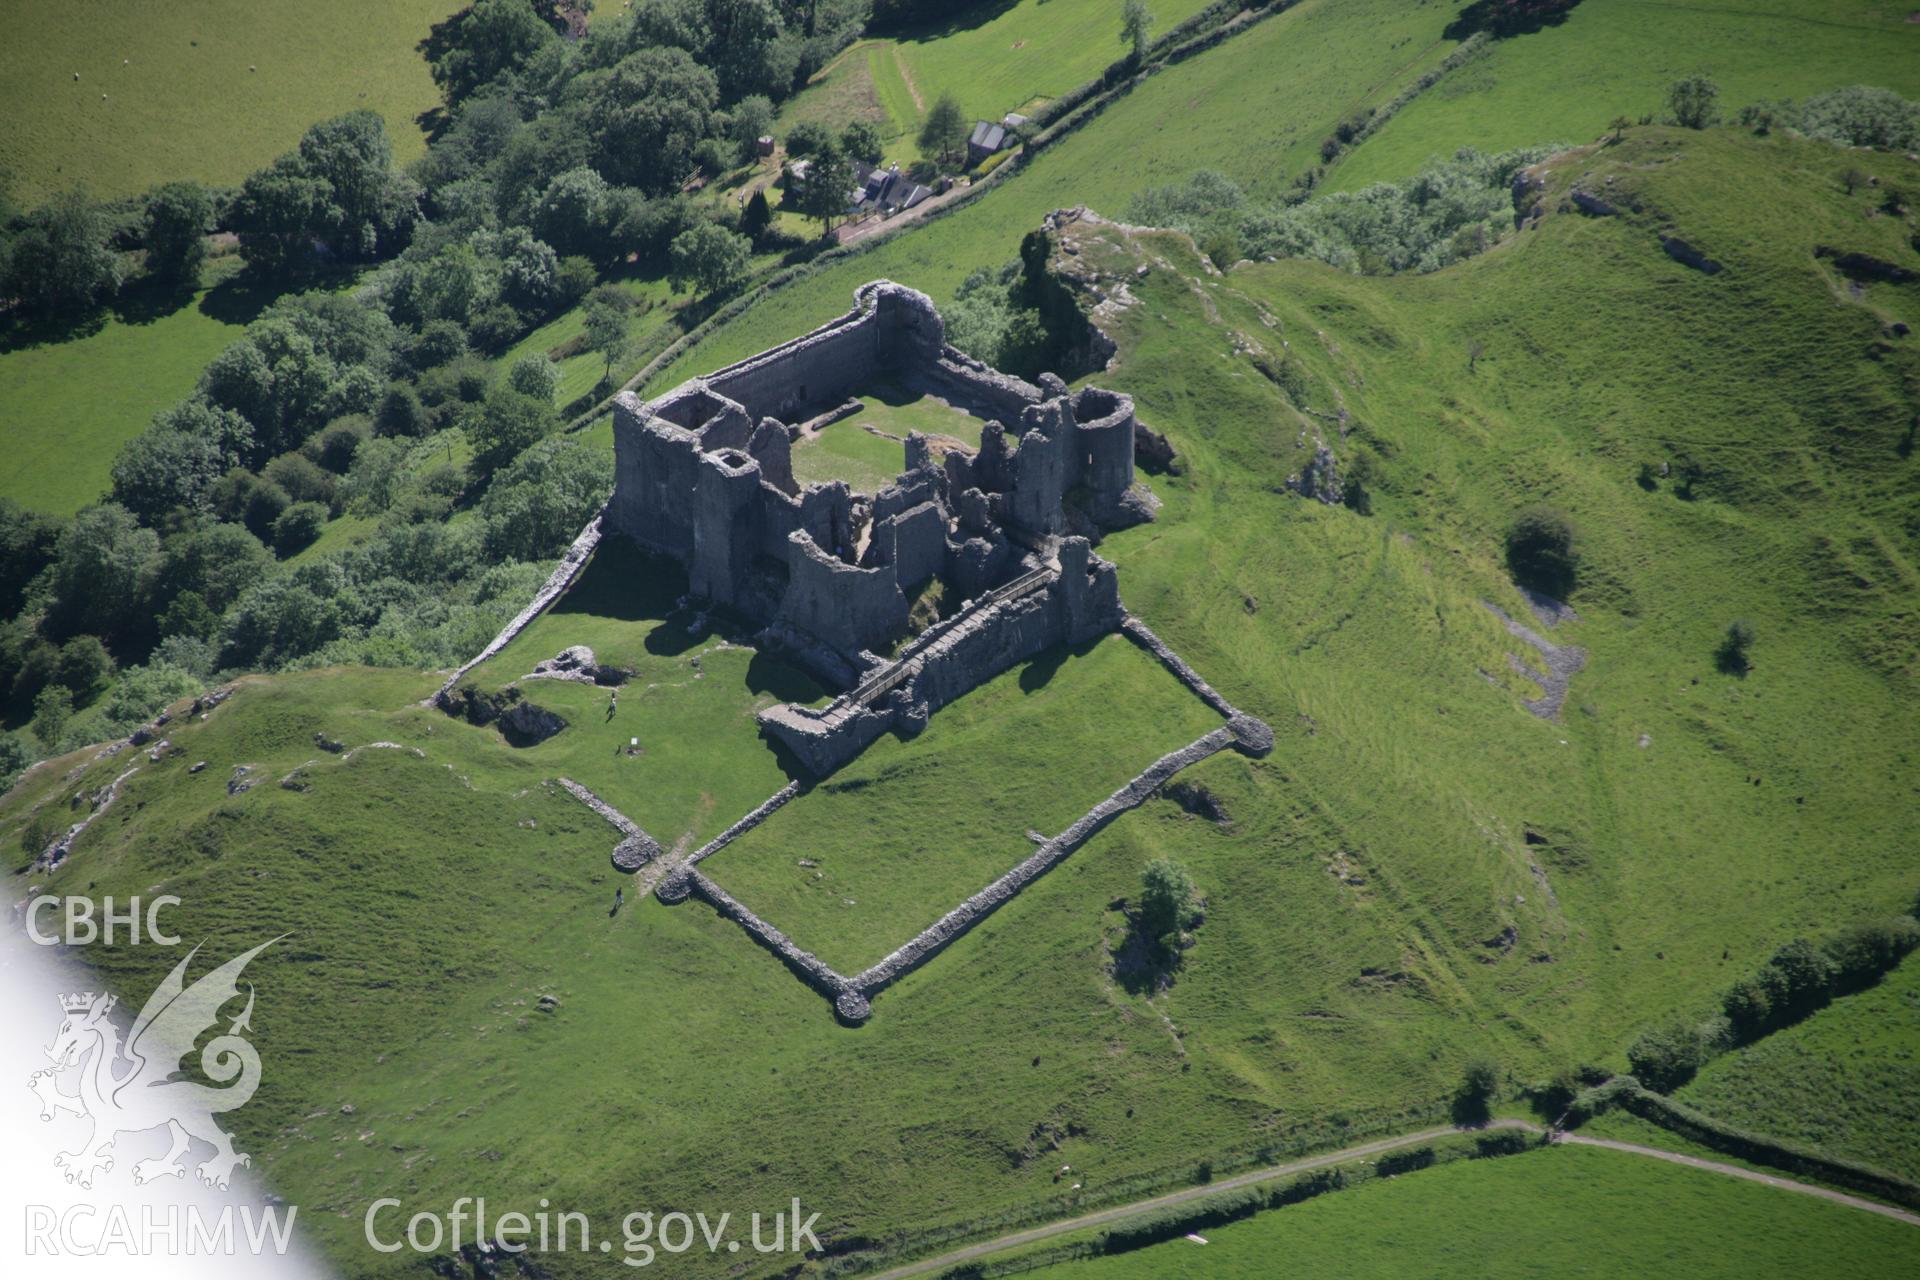 RCAHMW colour oblique aerial photograph of Carreg Cennen Castle from the north-east. Taken on 22 June 2005 by Toby Driver